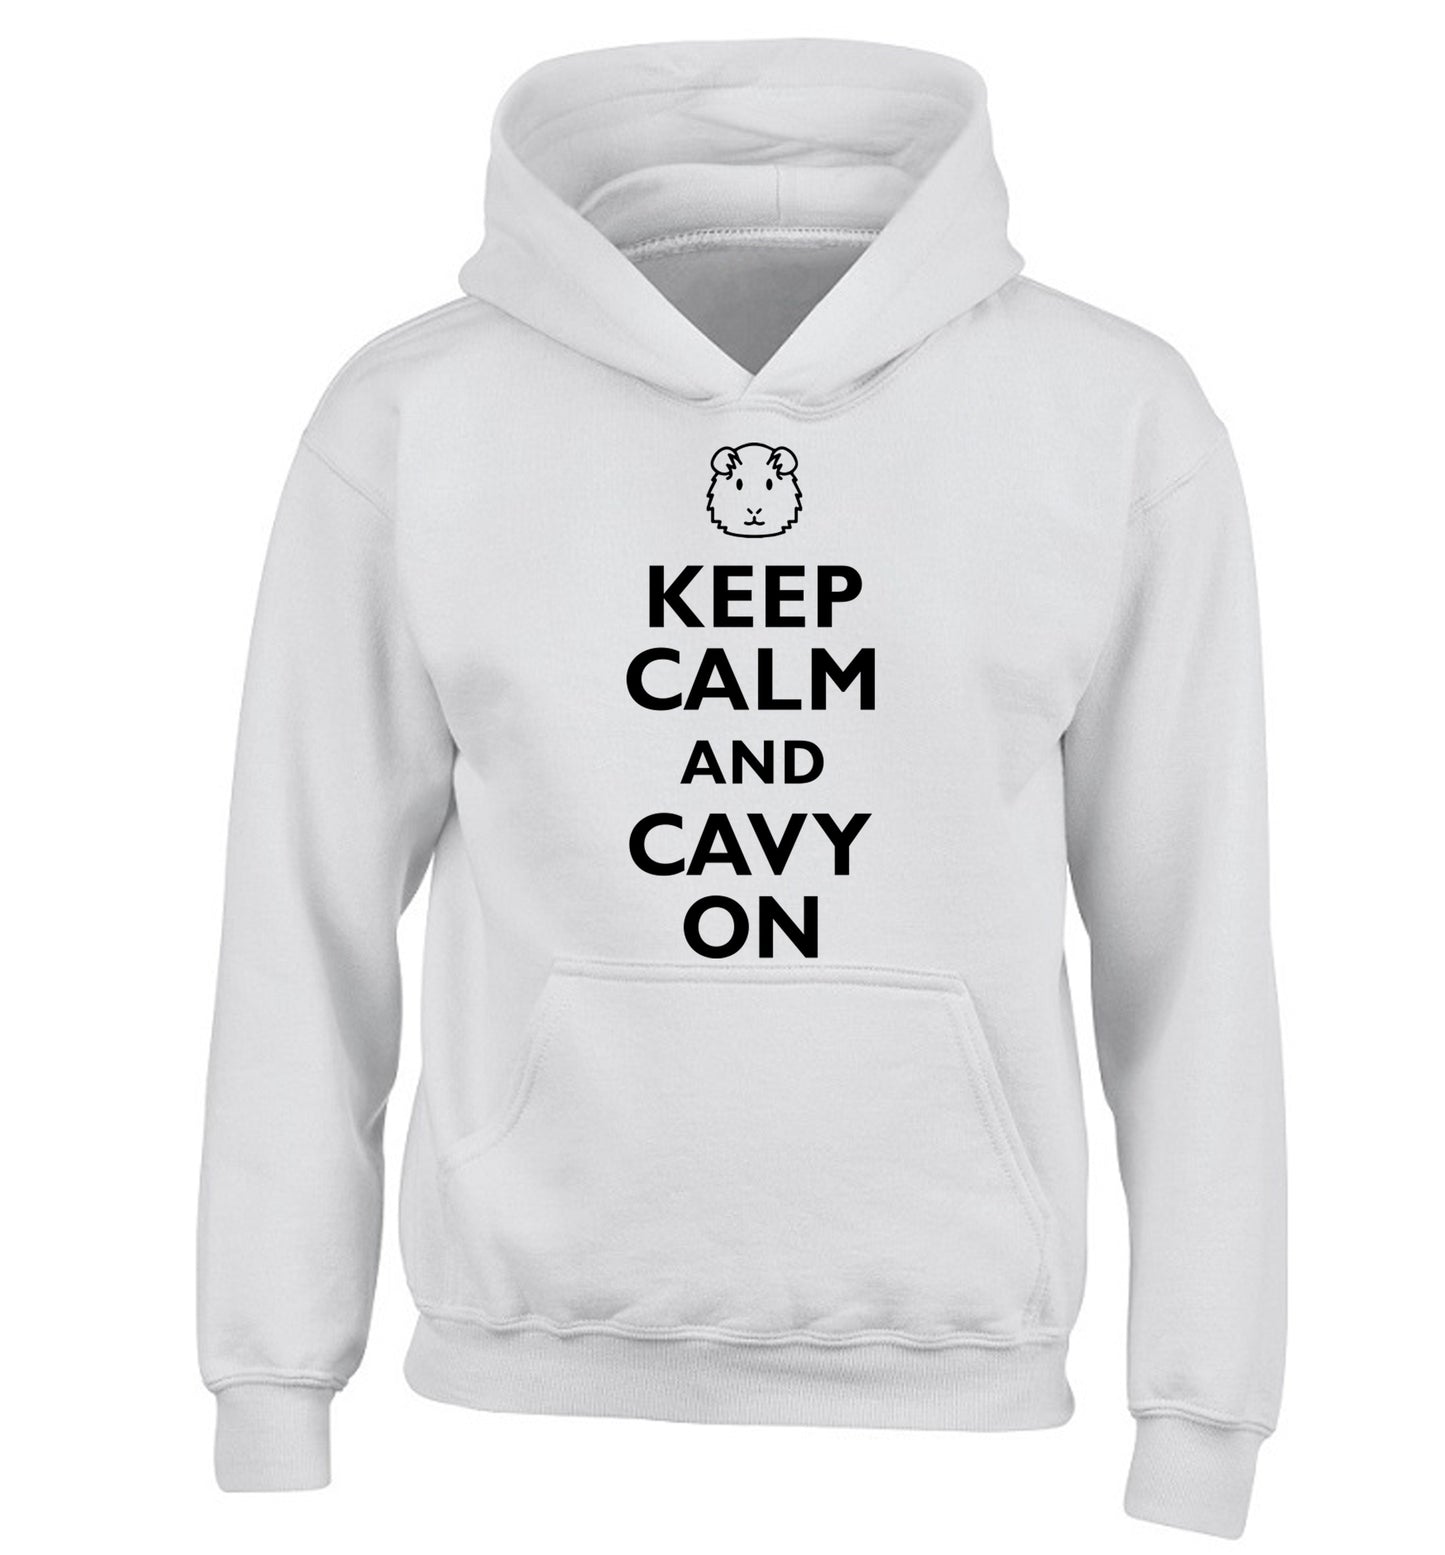 Keep calm and cavvy on children's white hoodie 12-14 Years